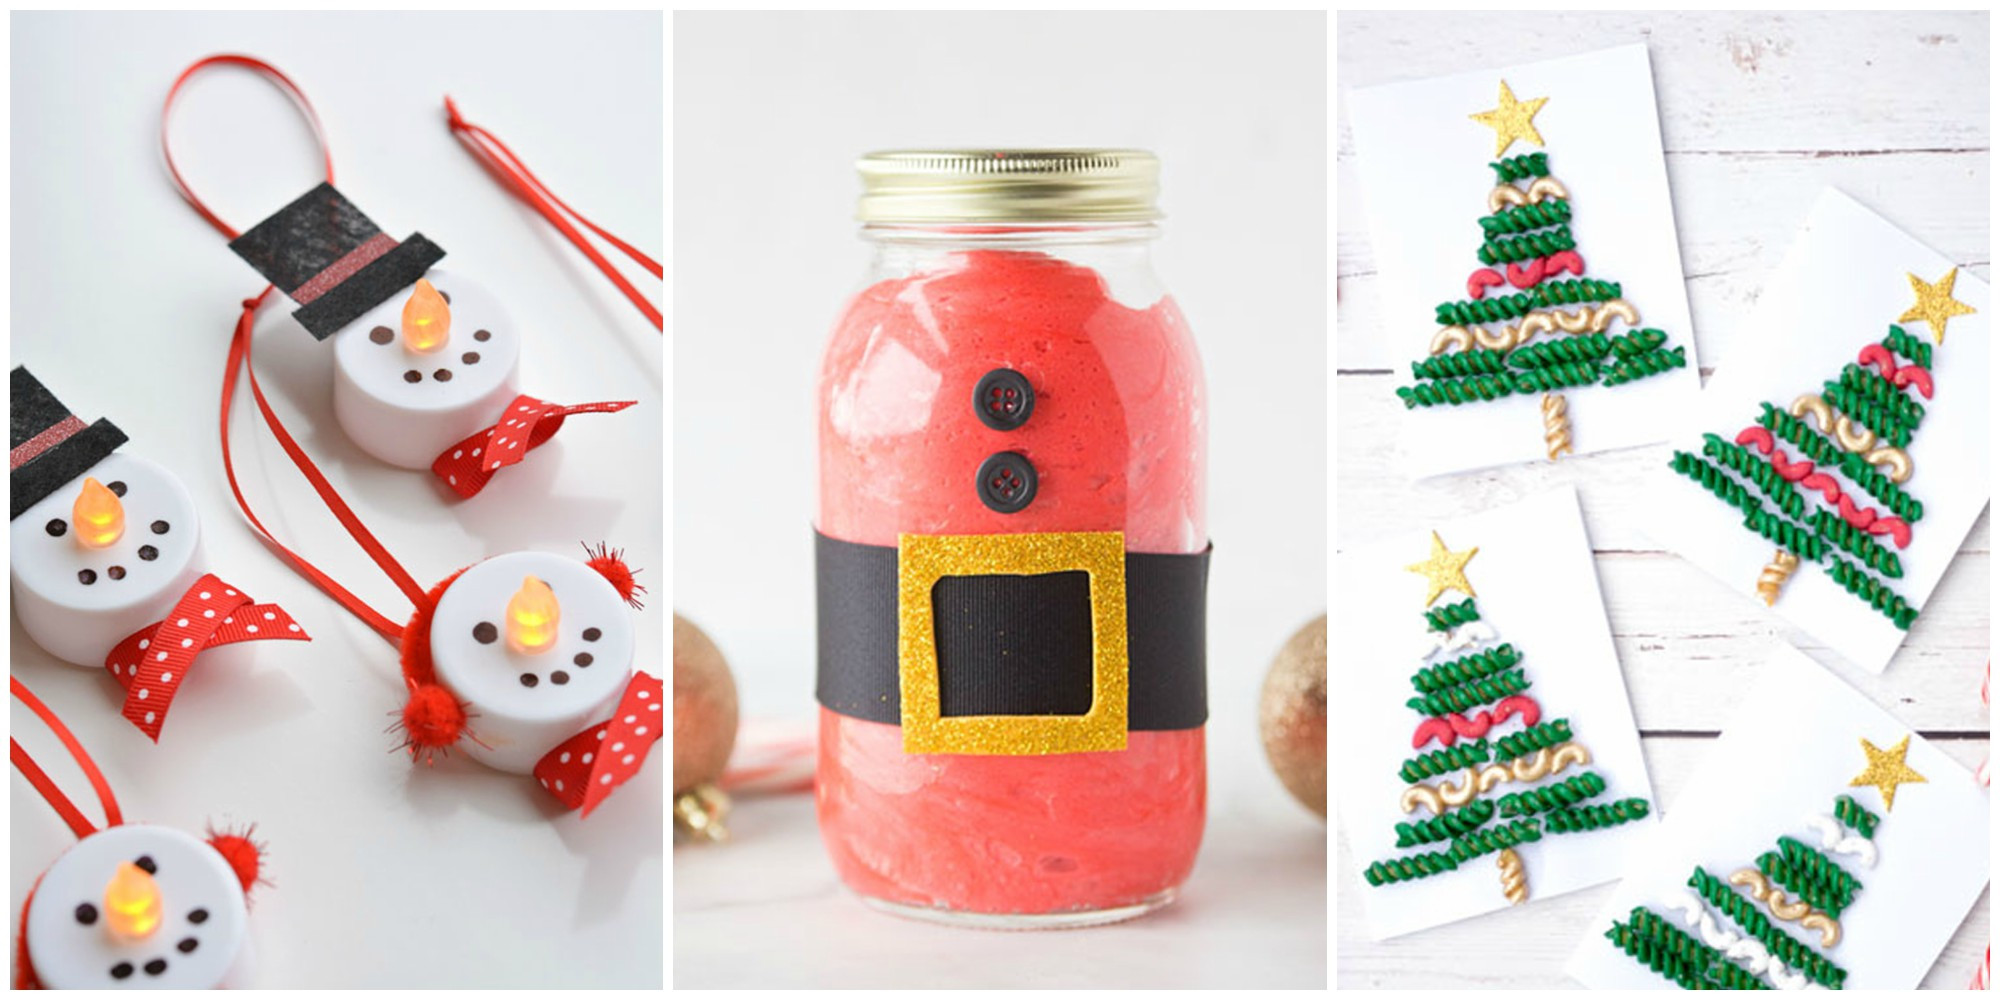 Xmas Craft Ideas For Kids
 12 Easy Christmas Crafts For Kids to Make Ideas for